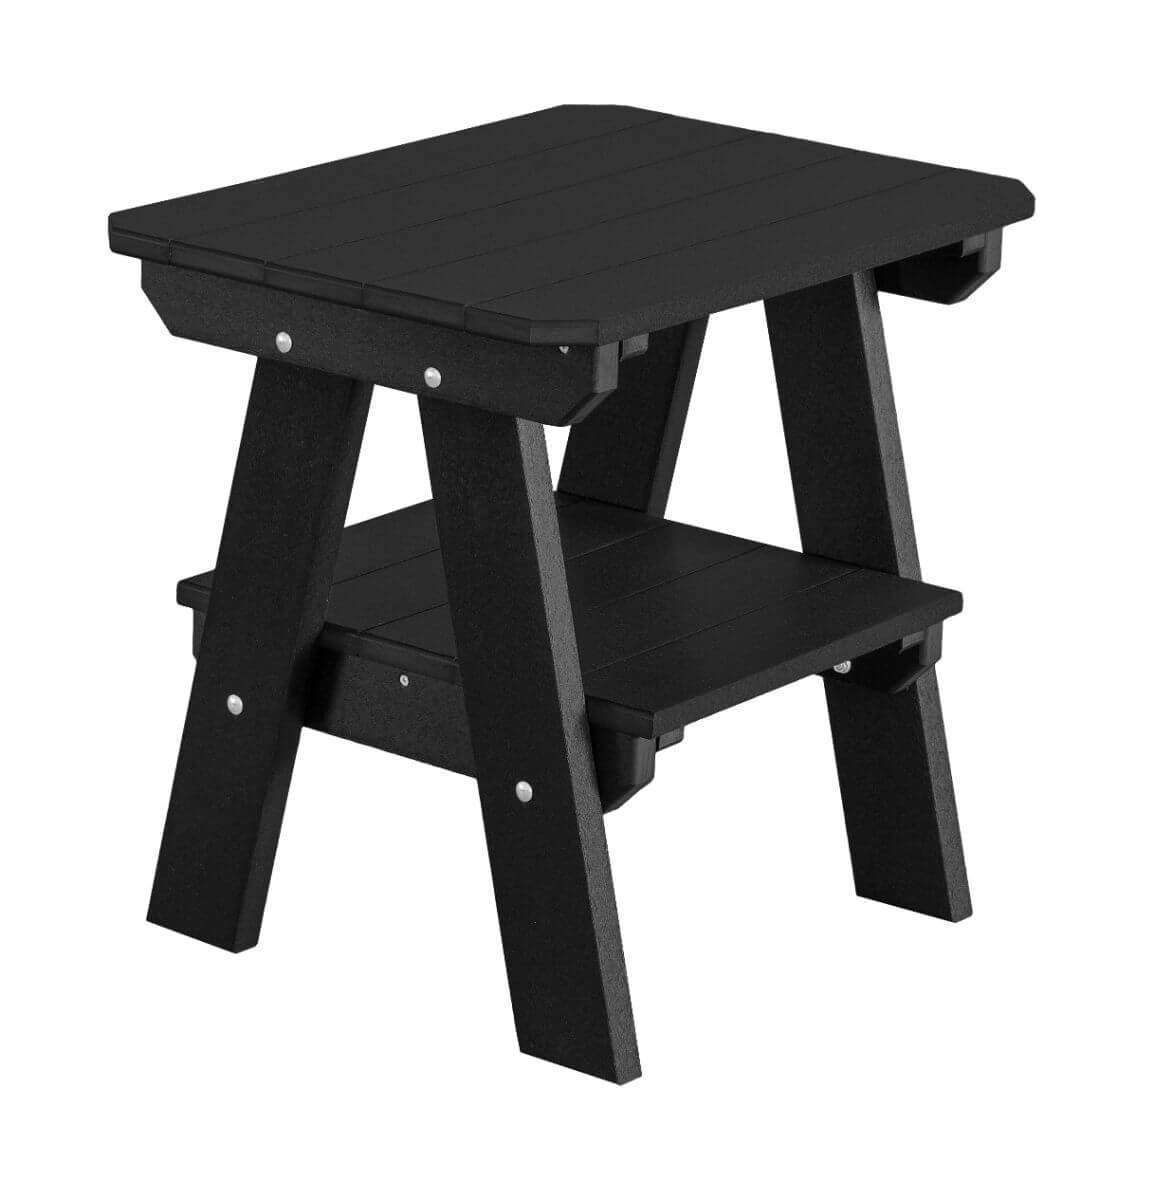 Black Sidra Outdoor End Table